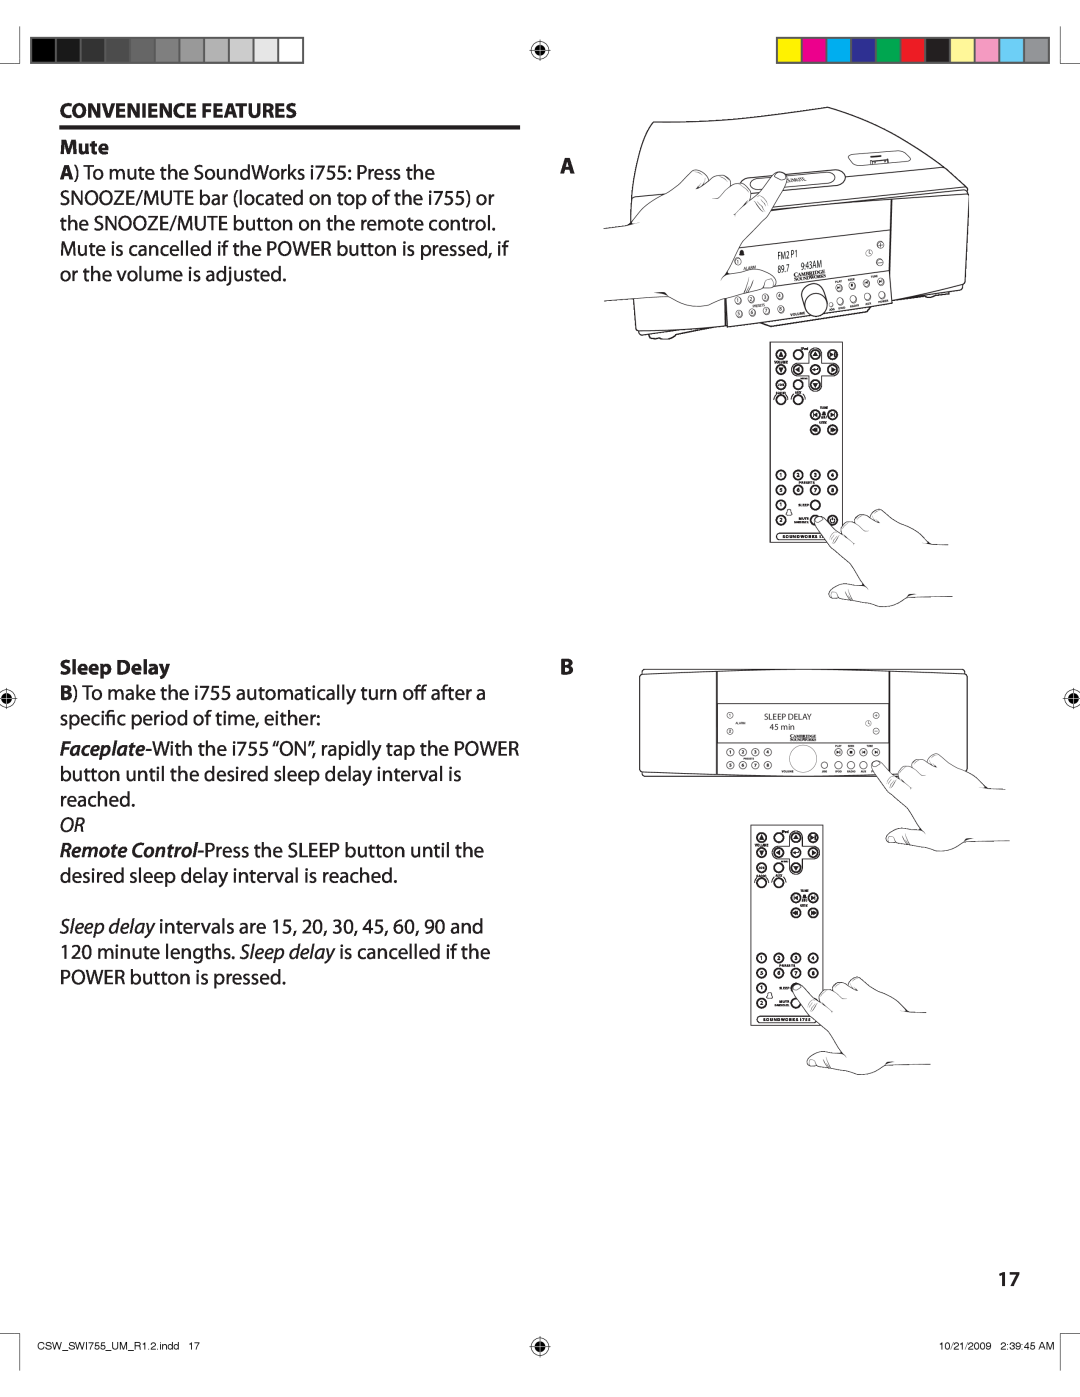 Cambridge SoundWorks I755 user manual CONVENIENCE FEATURES Mute, Sleep Delay 